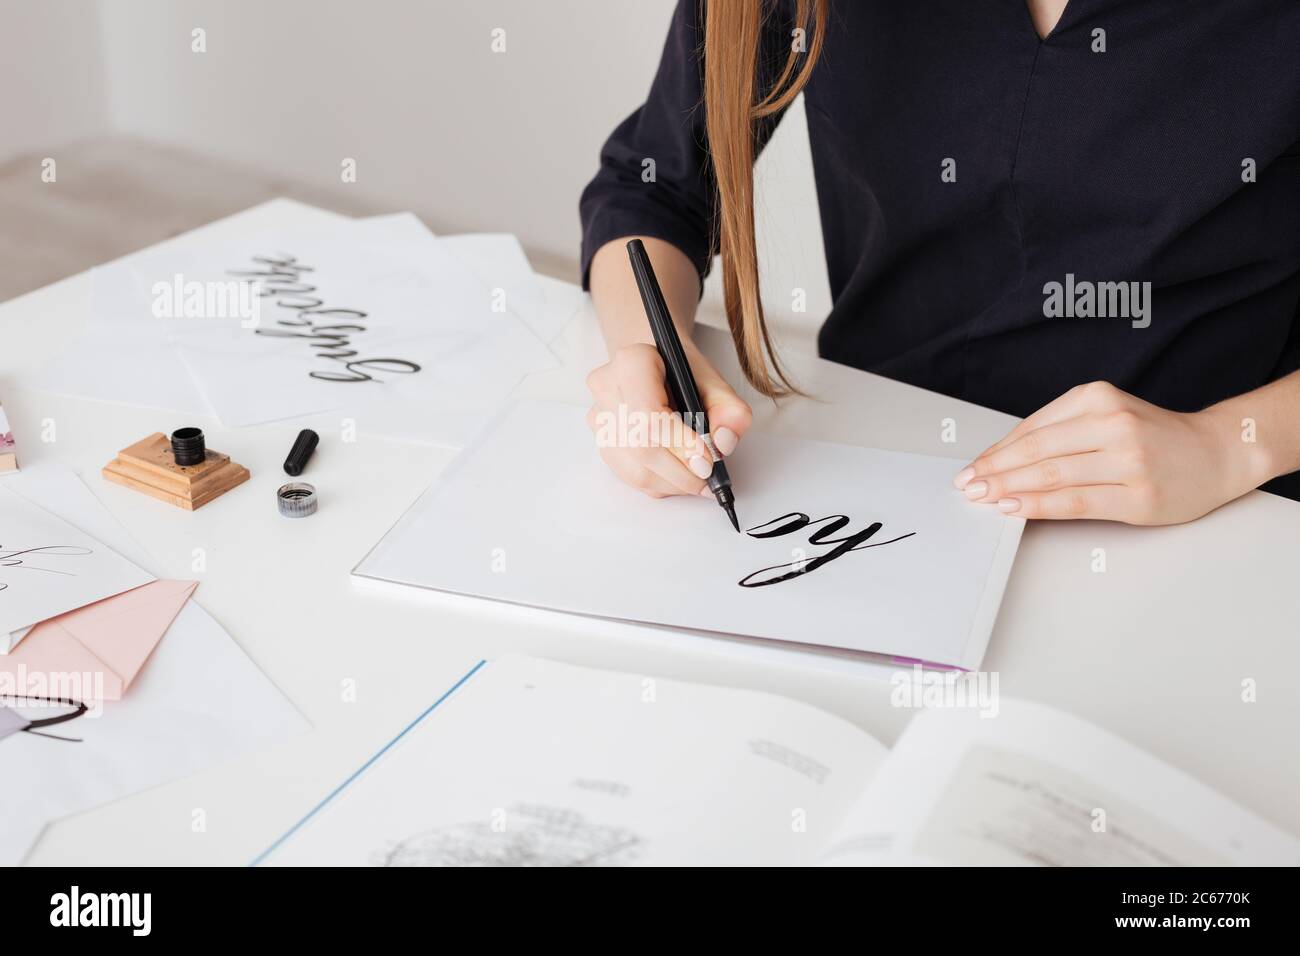 Portrait of young woman hands writing beautiful notes on paper on desk isolated Stock Photo